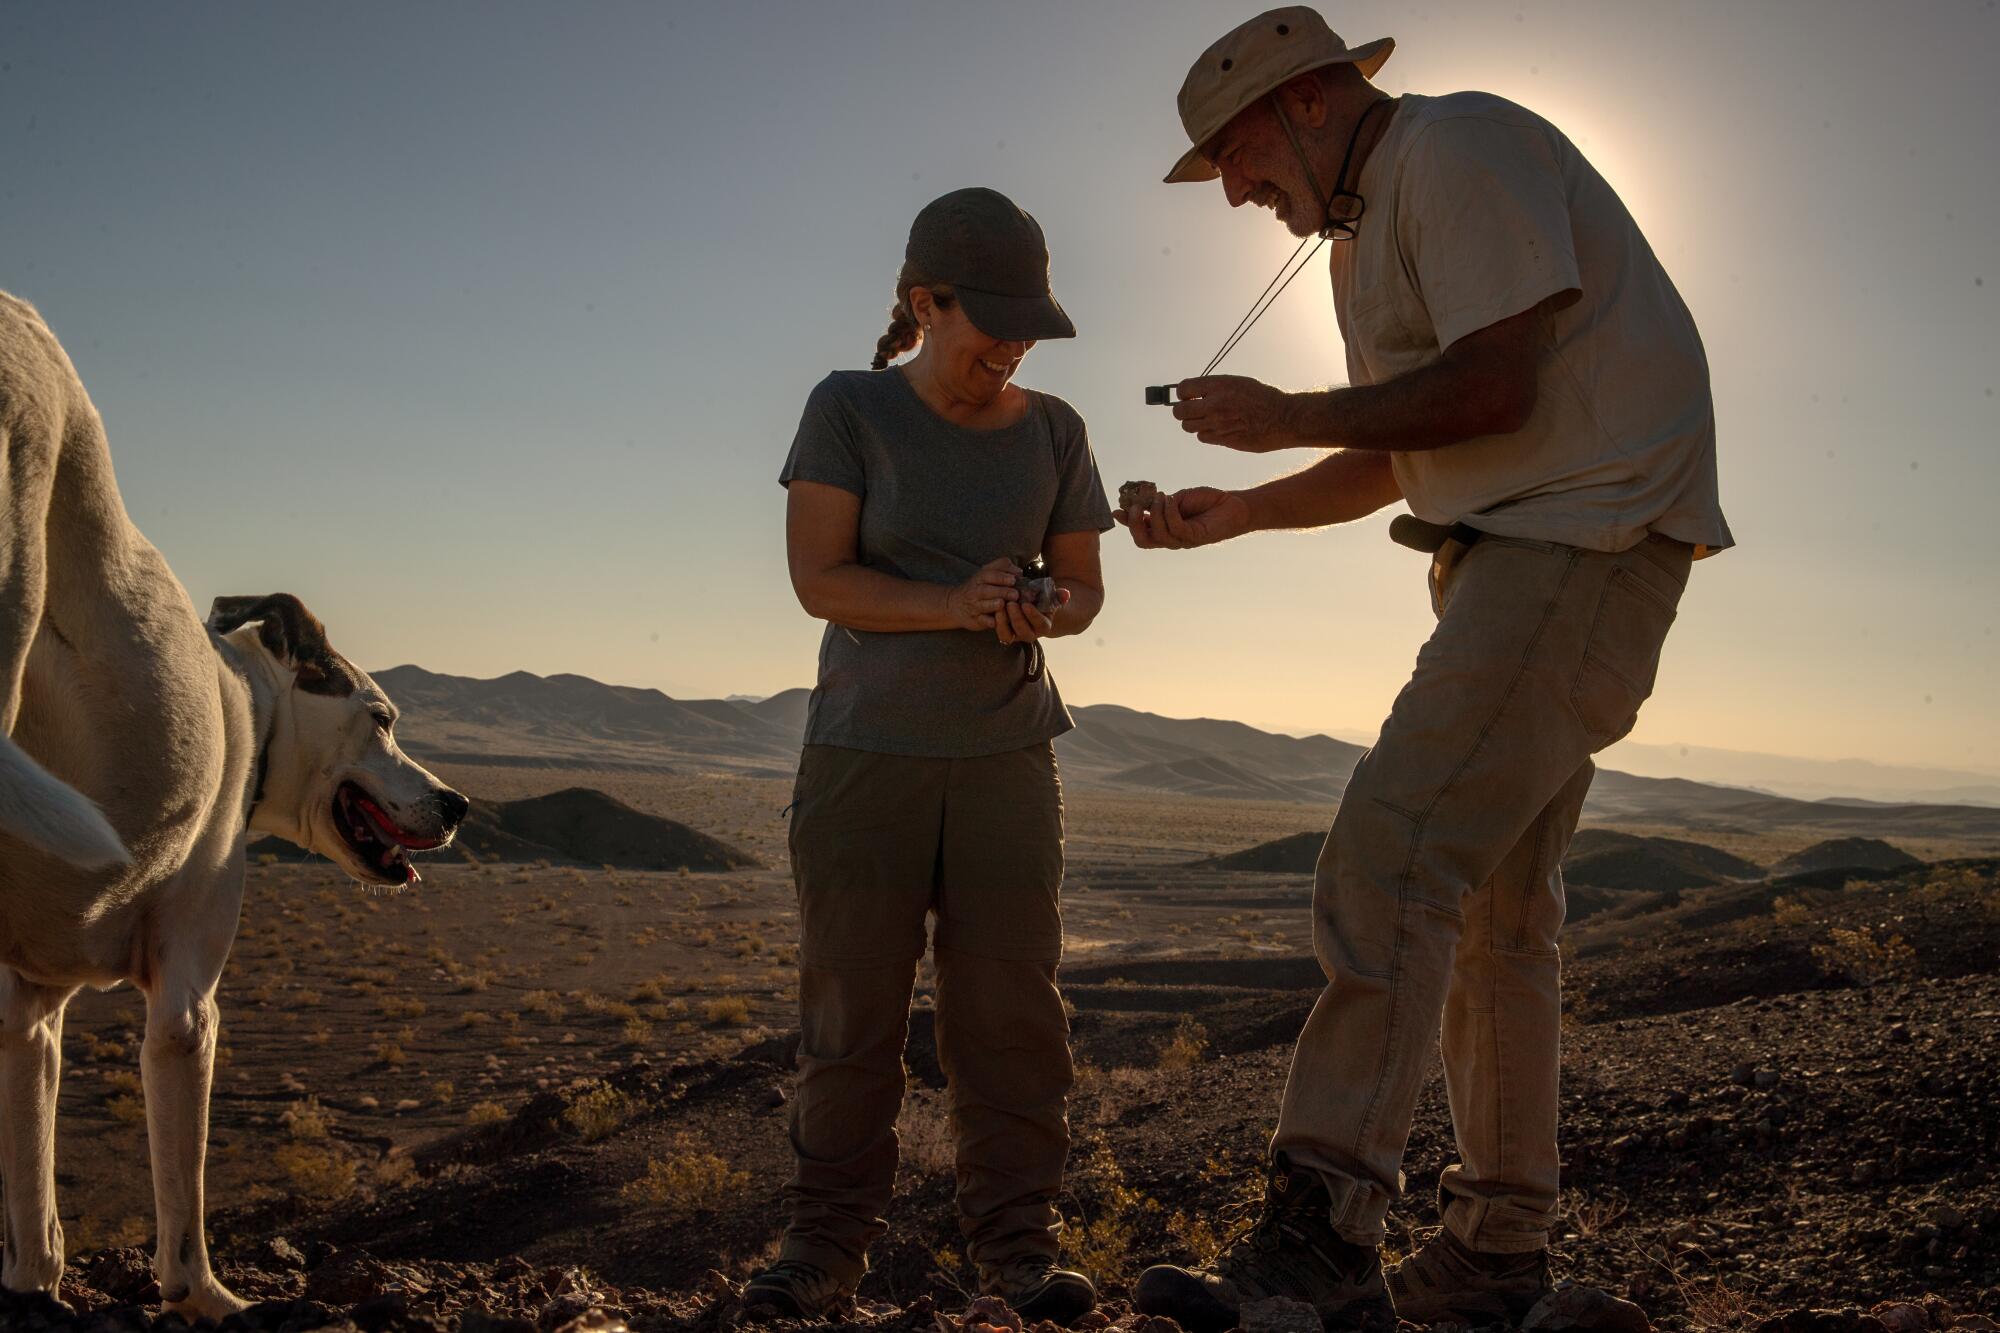 A man and a woman examine a rock sample in a desert landscape as a dog looks on.